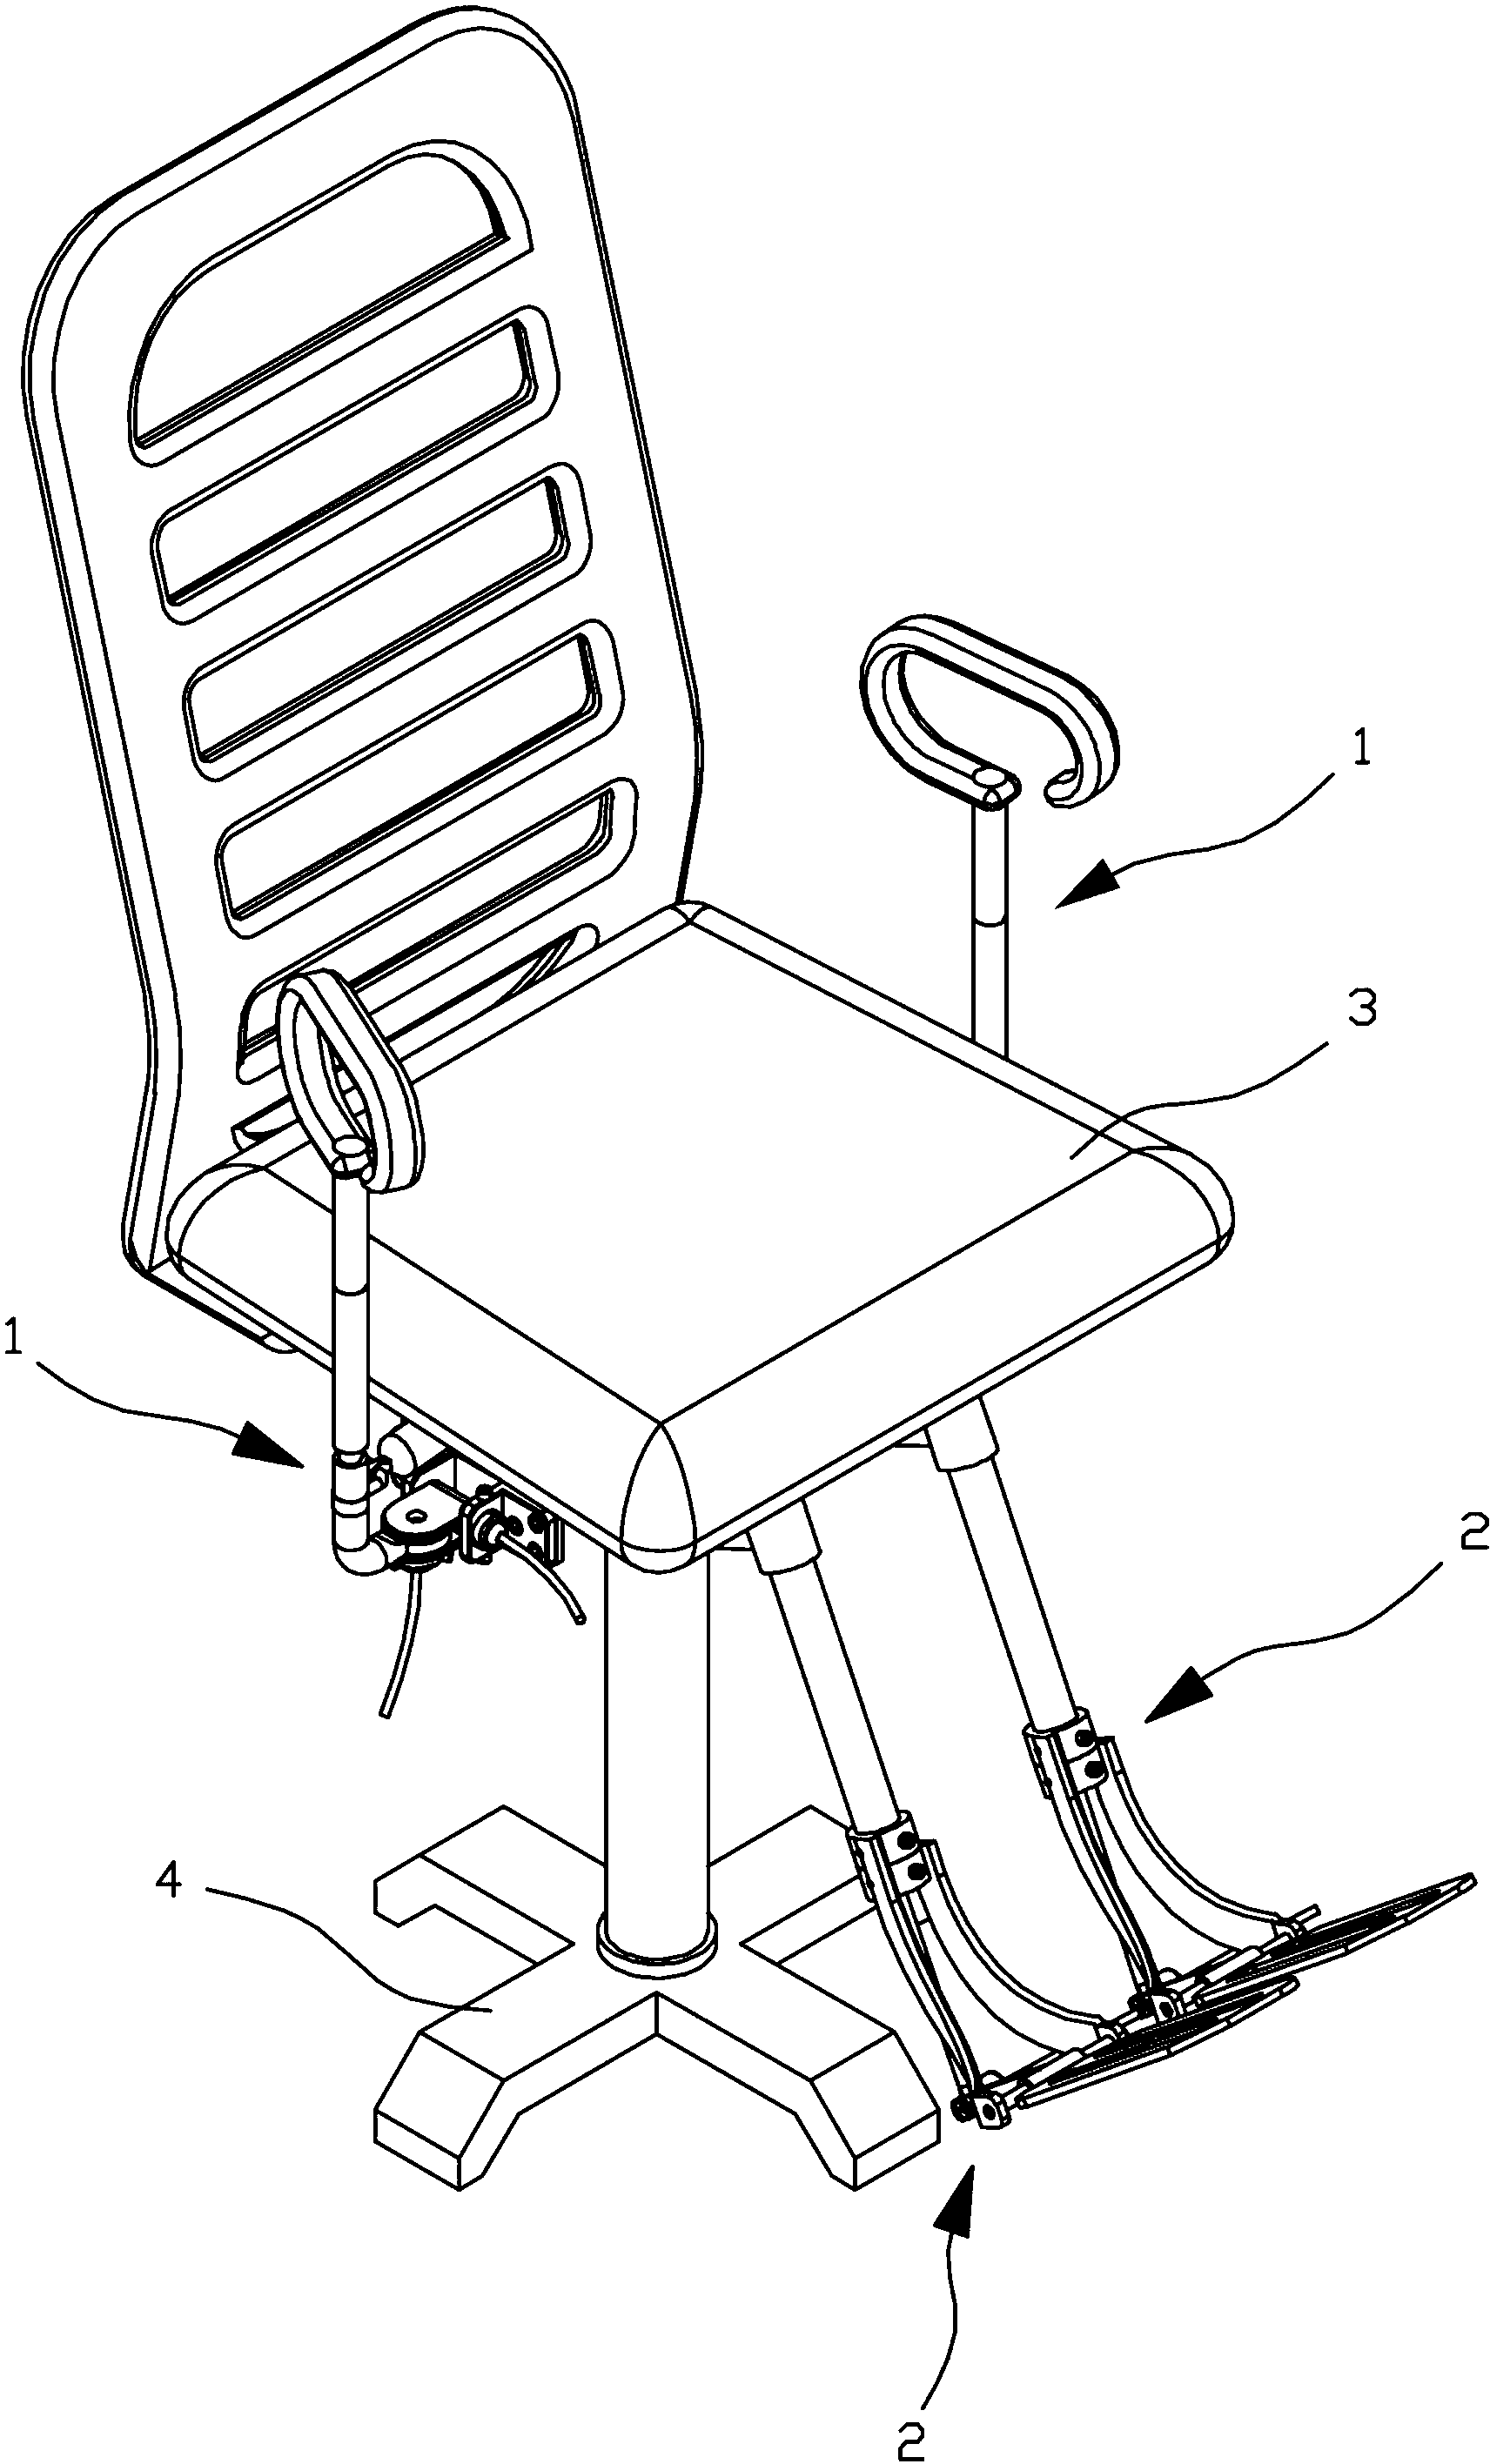 Body building chair